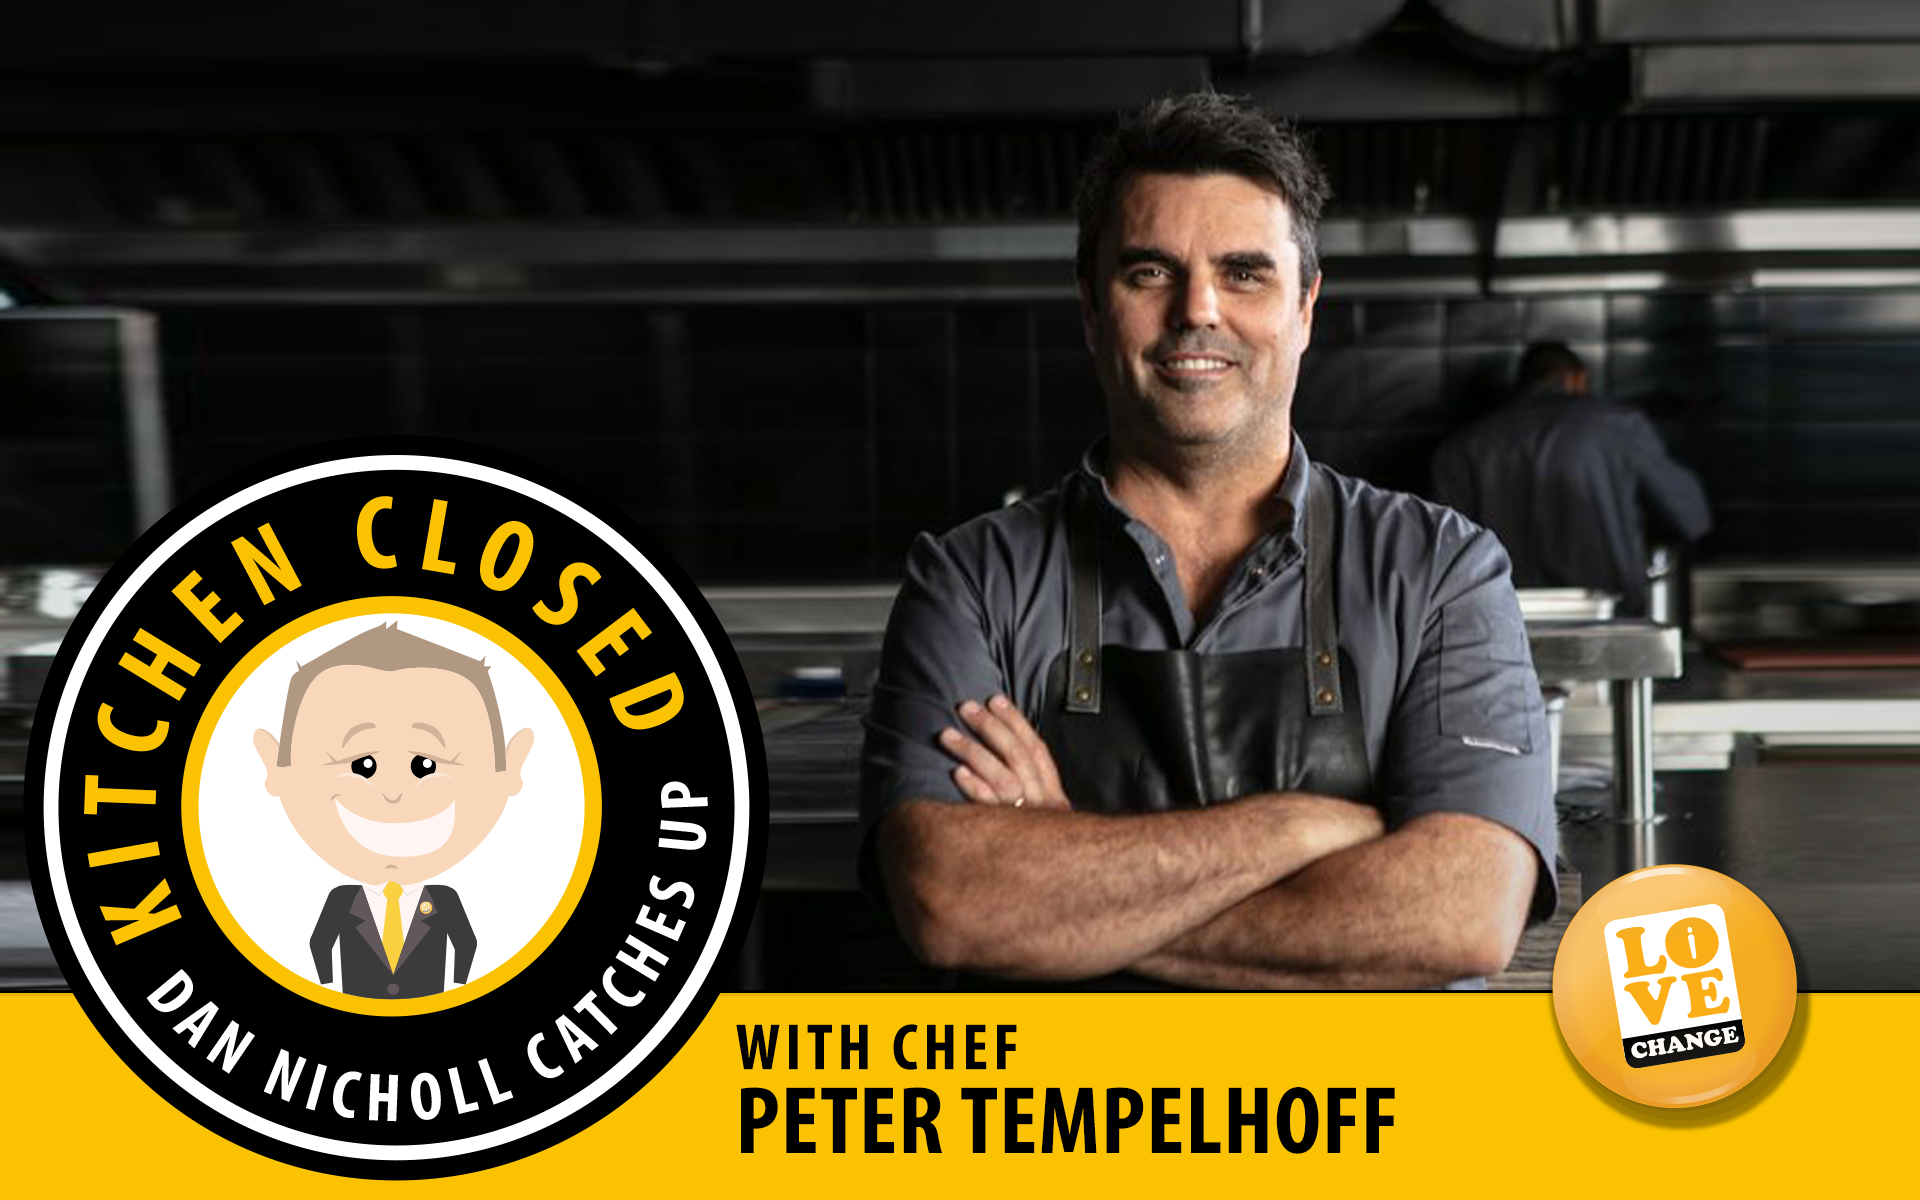 Kitchen Closed: Dan Nicholl cooks with Chef Peter Tempelhoff